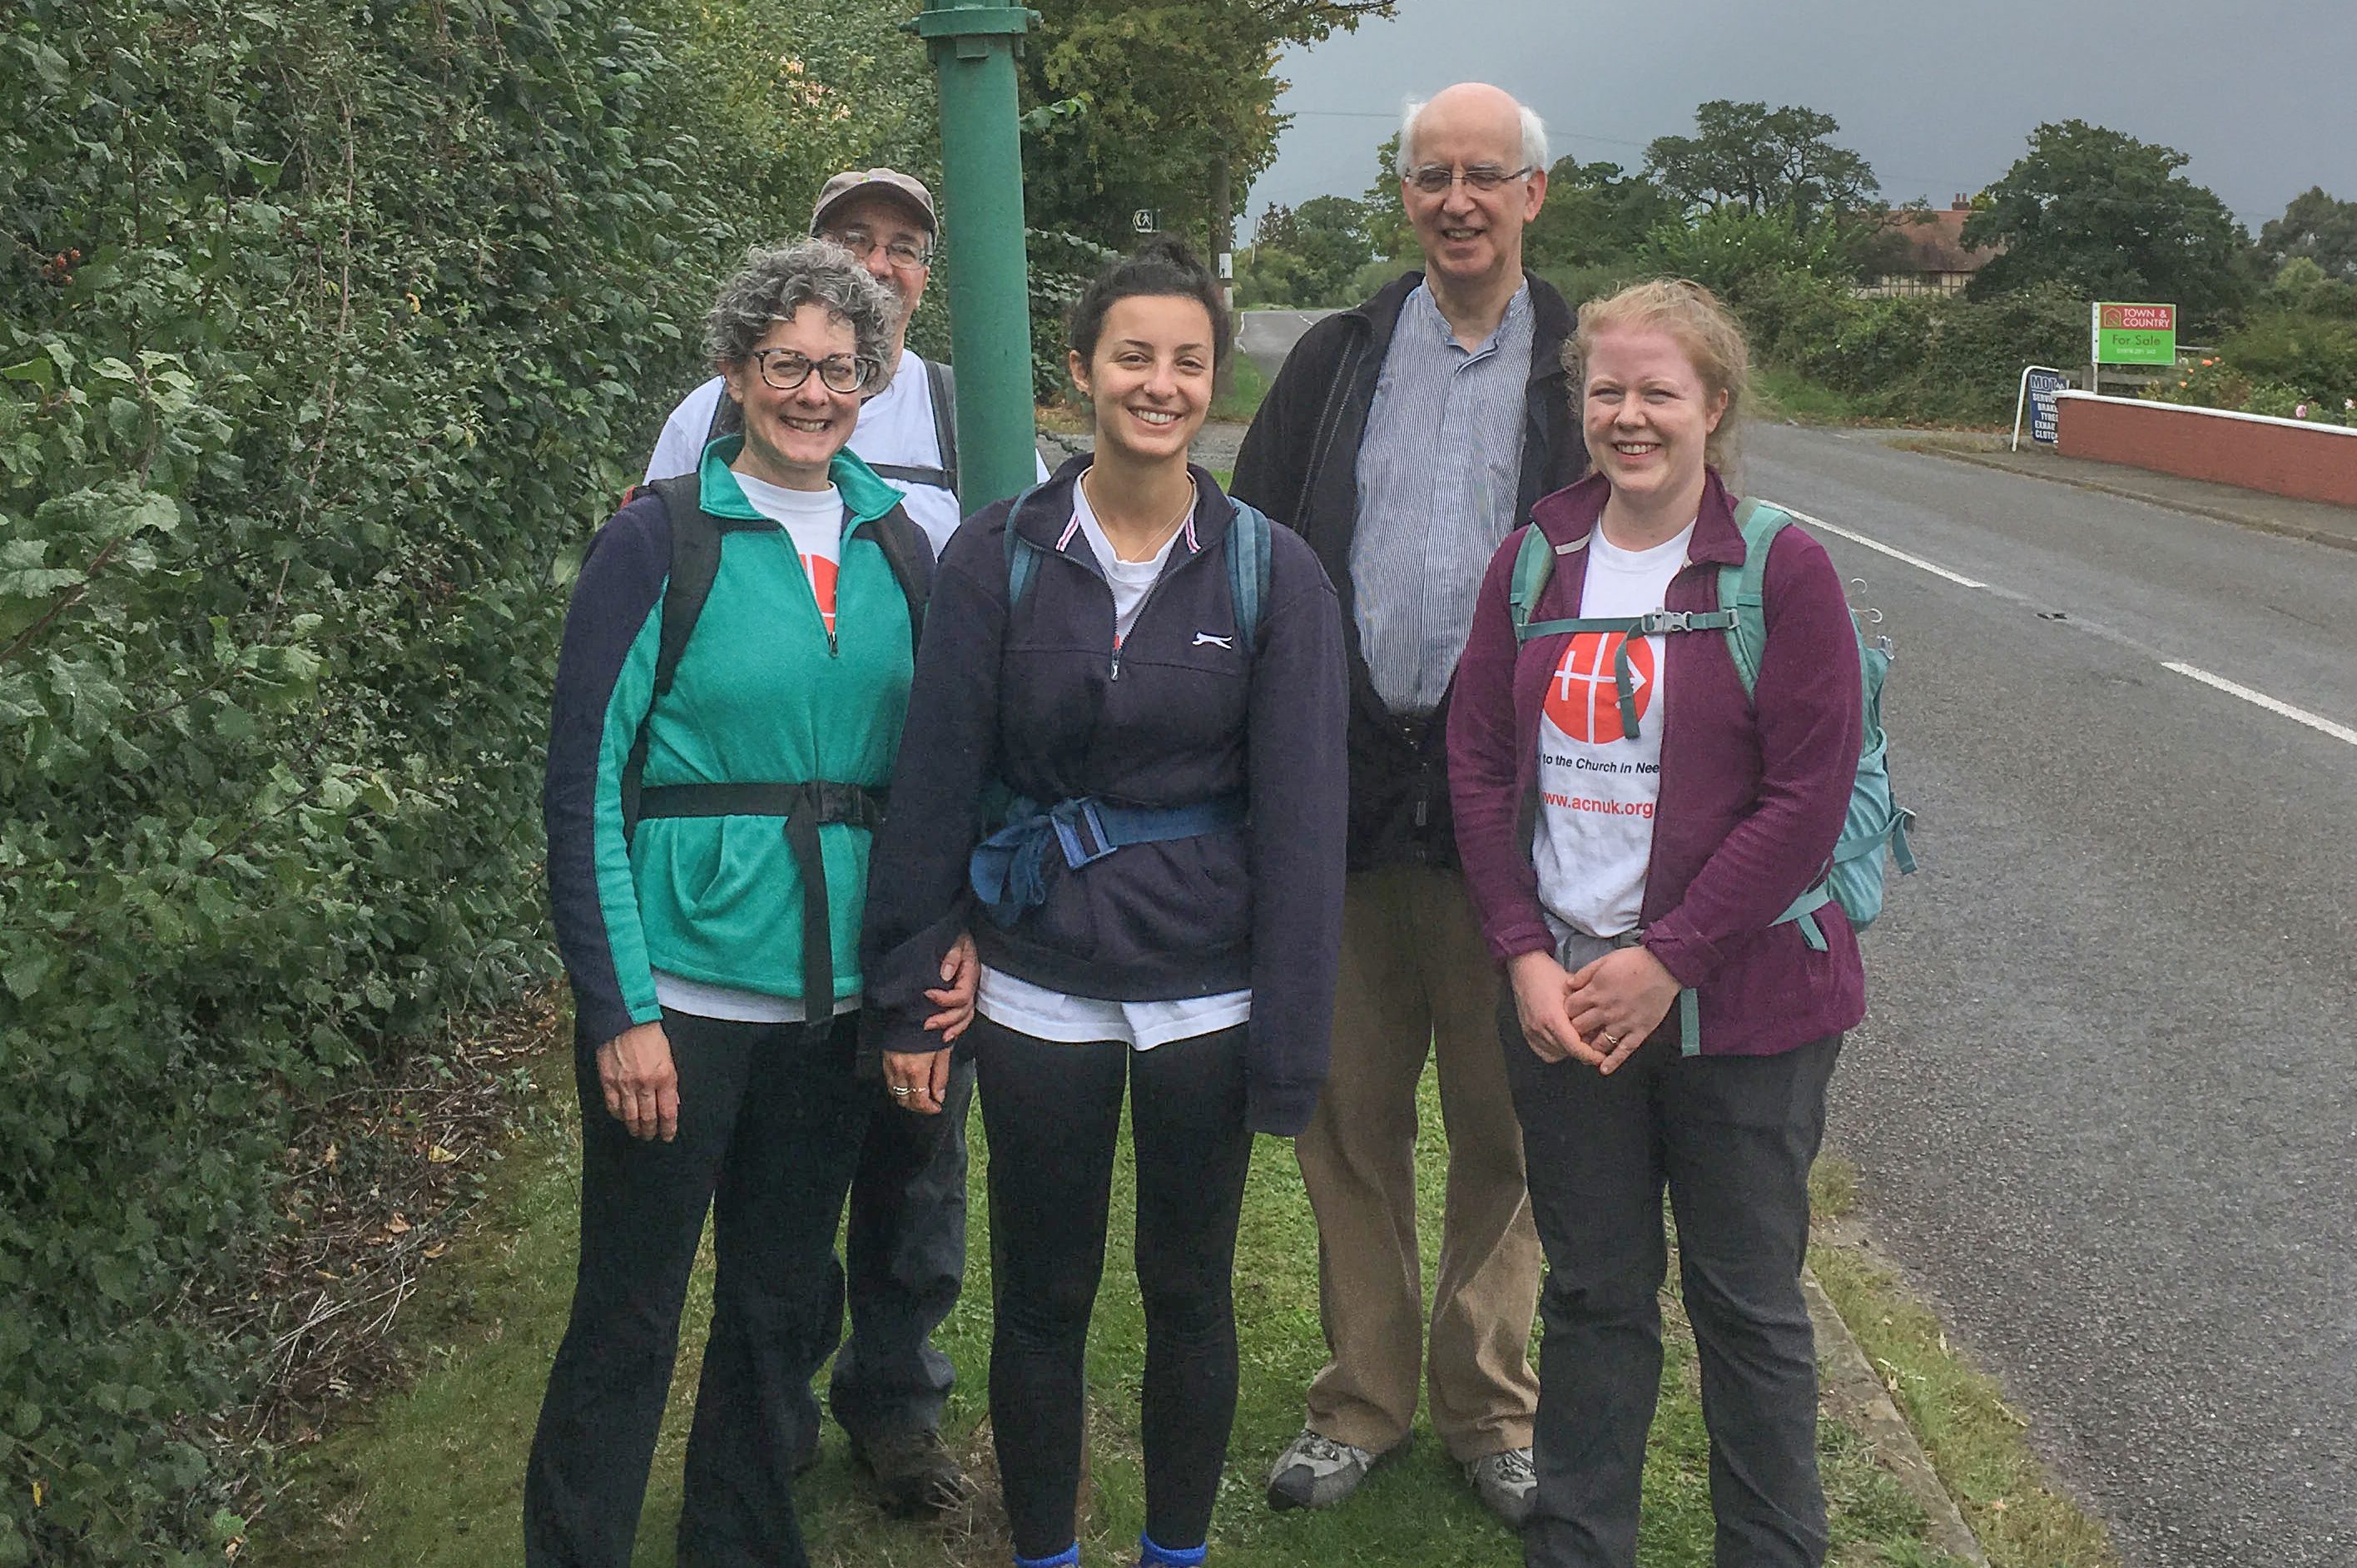 ACN’s Caroline Hull (left) and Bridget Teasdale (right) with Bishop Peter Brignall of Wrexham and ACN supporters Clemmie and Andrew (© ACN)